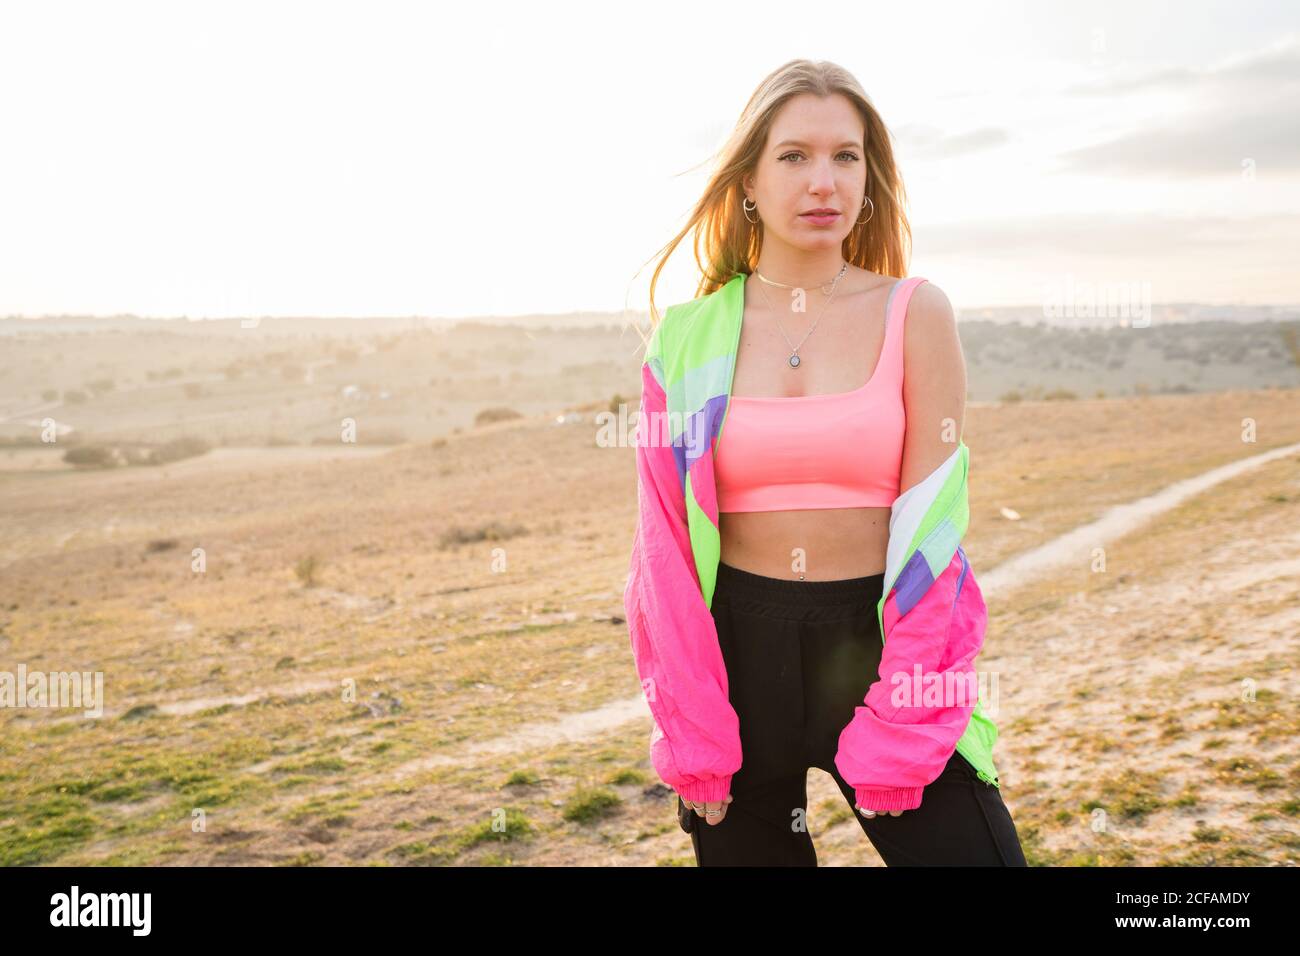 Contemporary blond haired young Woman in pink bra with colorful jacket looking at camera with remote land on background Stock Photo